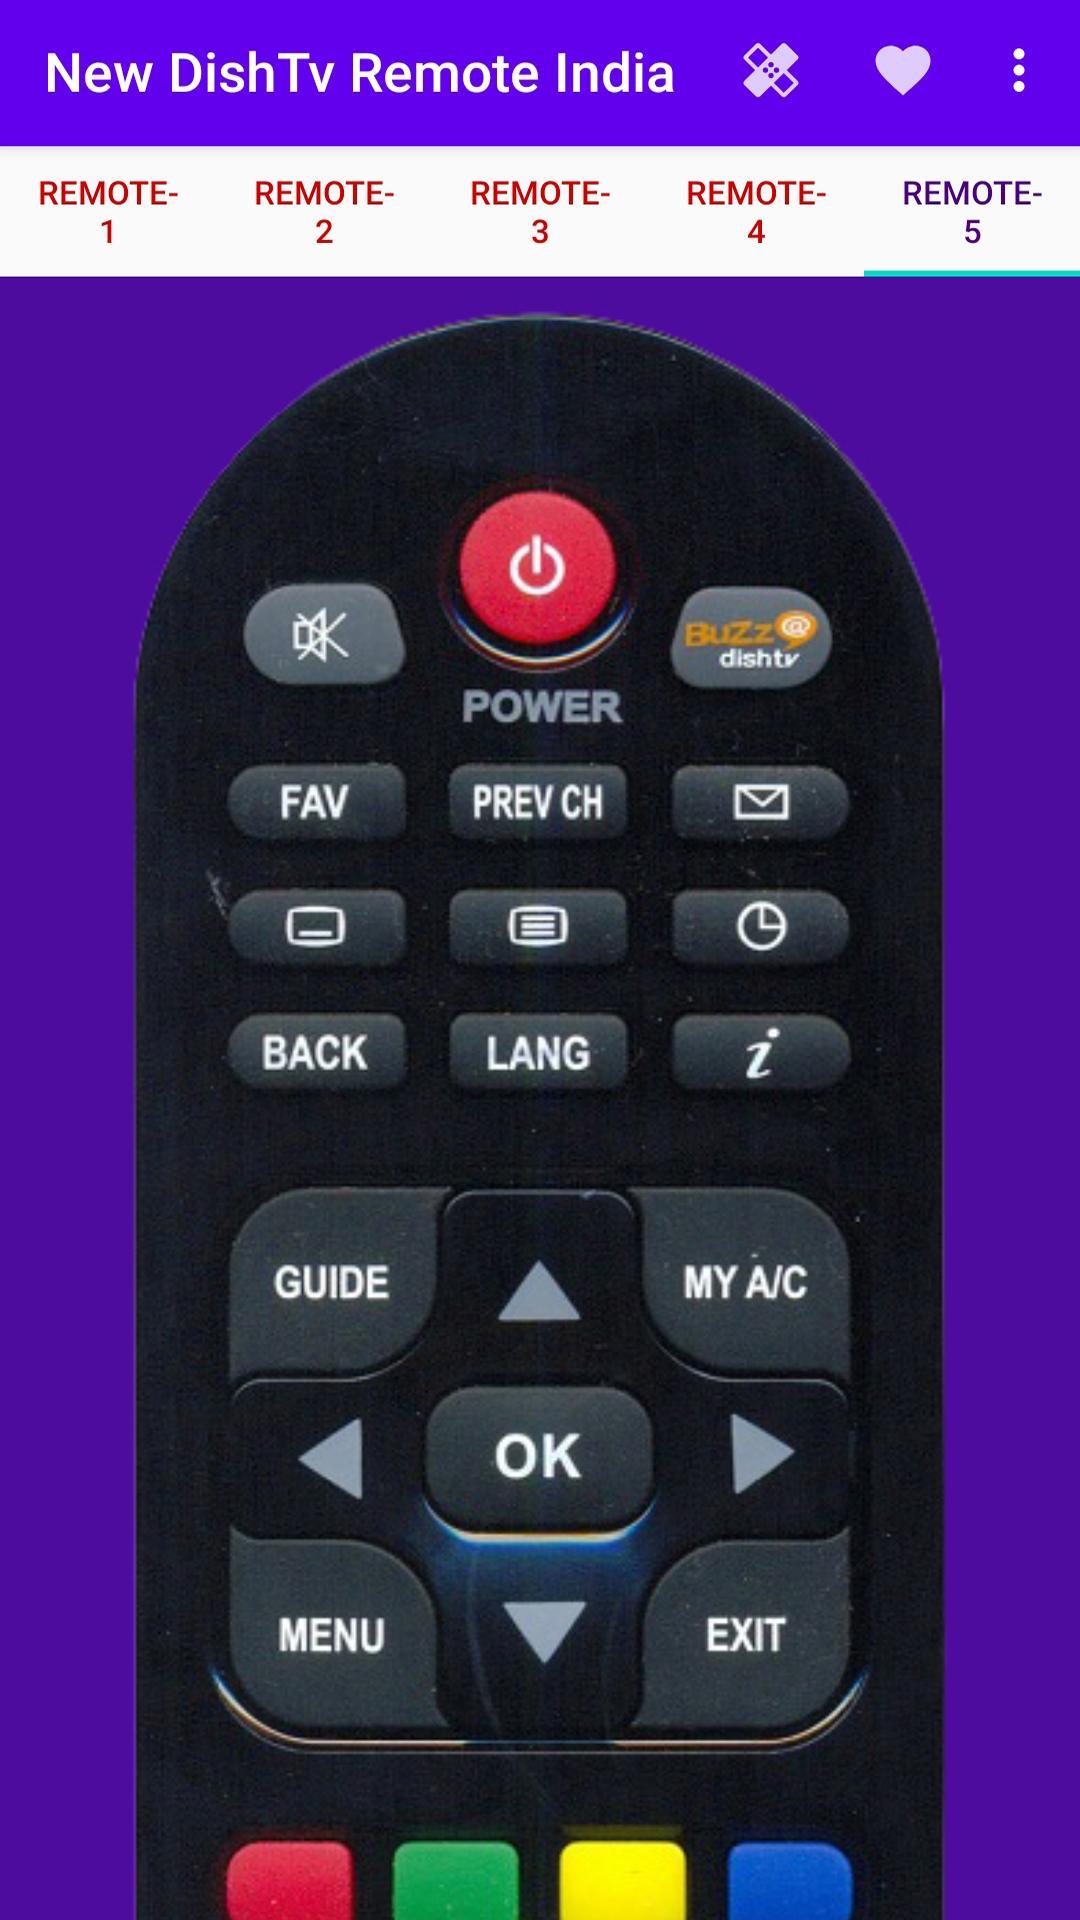 New Dishtv Remote App Remote App For Dishtv India For Android Apk Download